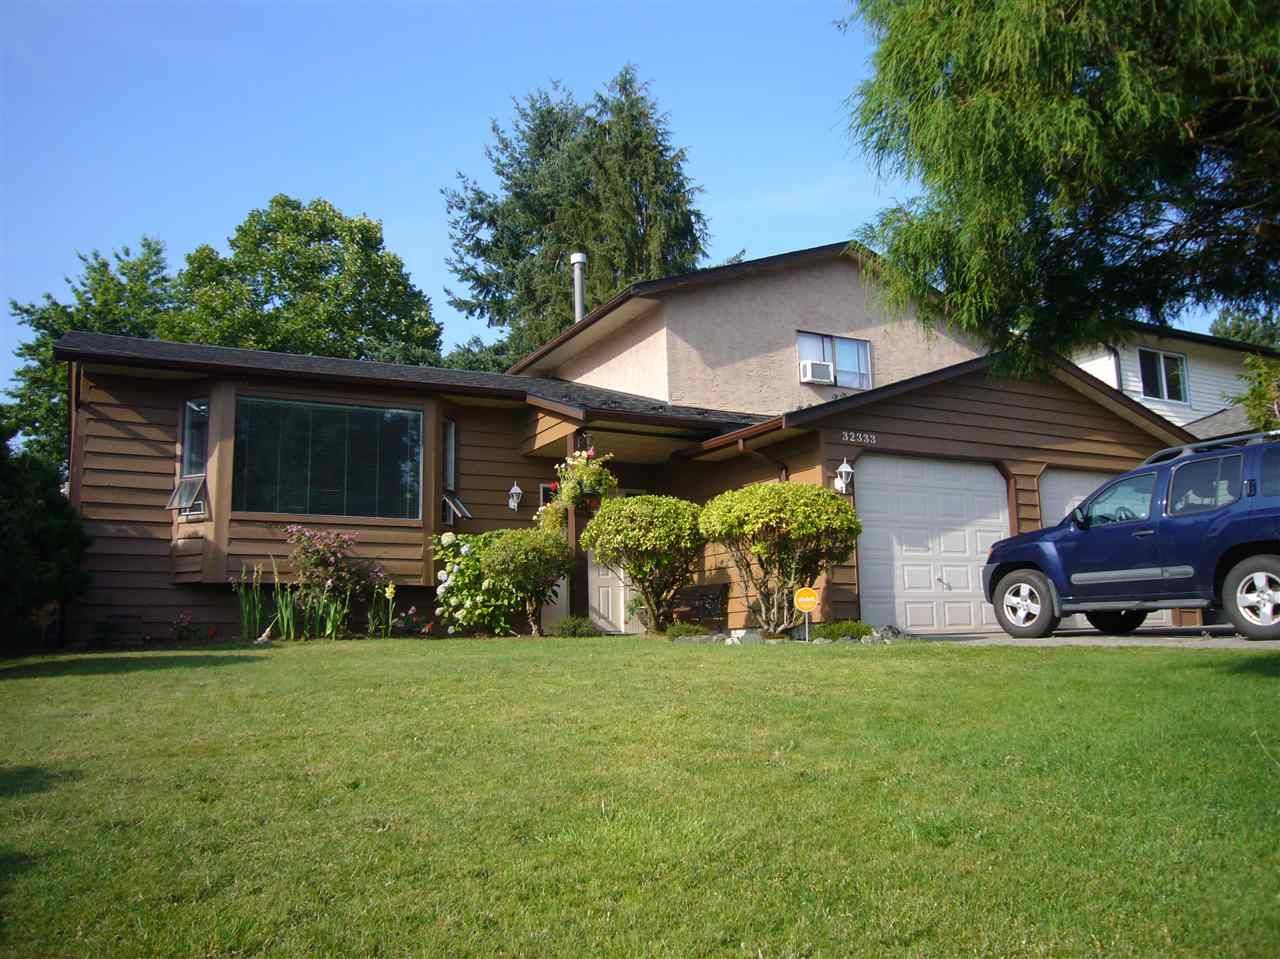 Main Photo: 32333 BEAVER Drive in Mission: Mission BC House for sale : MLS®# R2197503